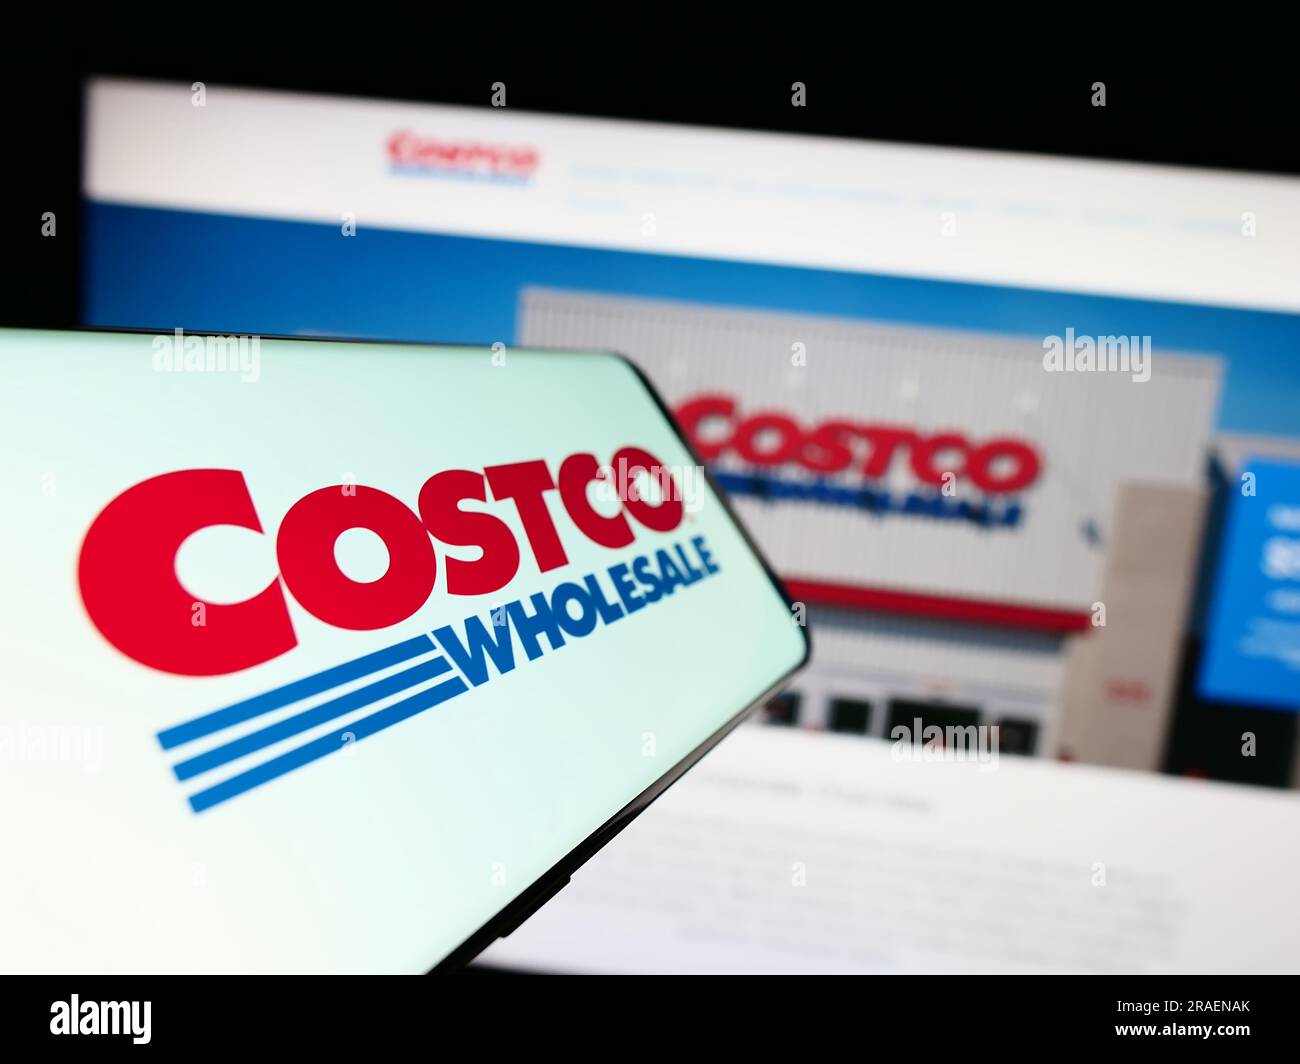 Smartphone with logo of American company Costco Wholesale Corporation on screen in front of website. Focus on center-left of phone display. Stock Photo